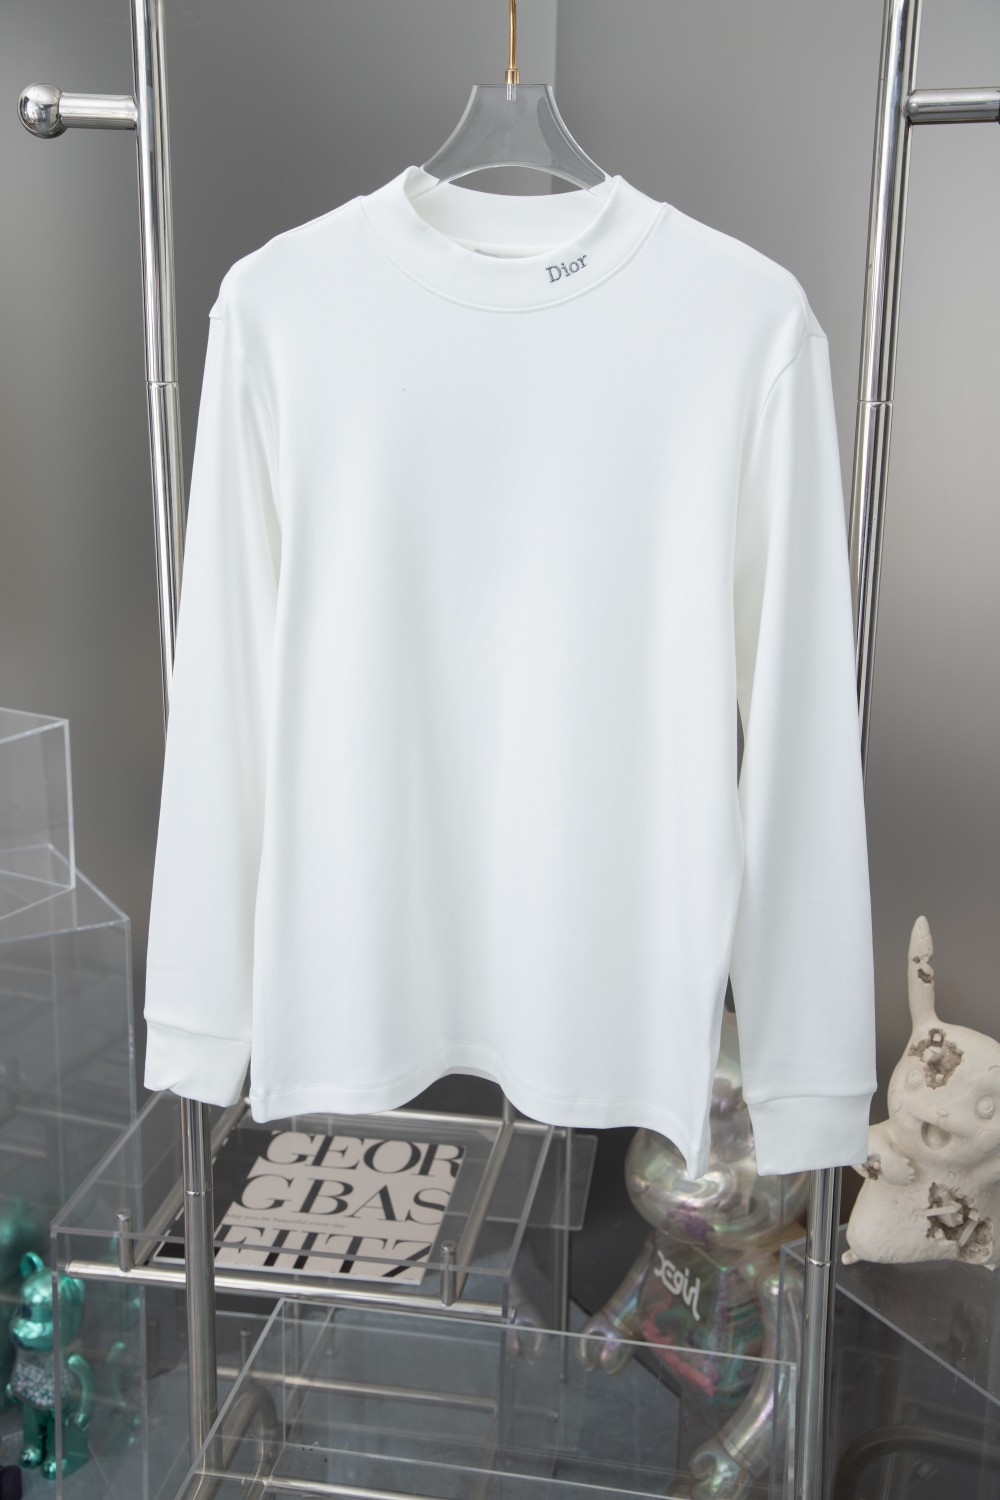 Dior Clothing T-Shirt Black White Embroidery Cotton Fall/Winter Collection Fashion Long Sleeve